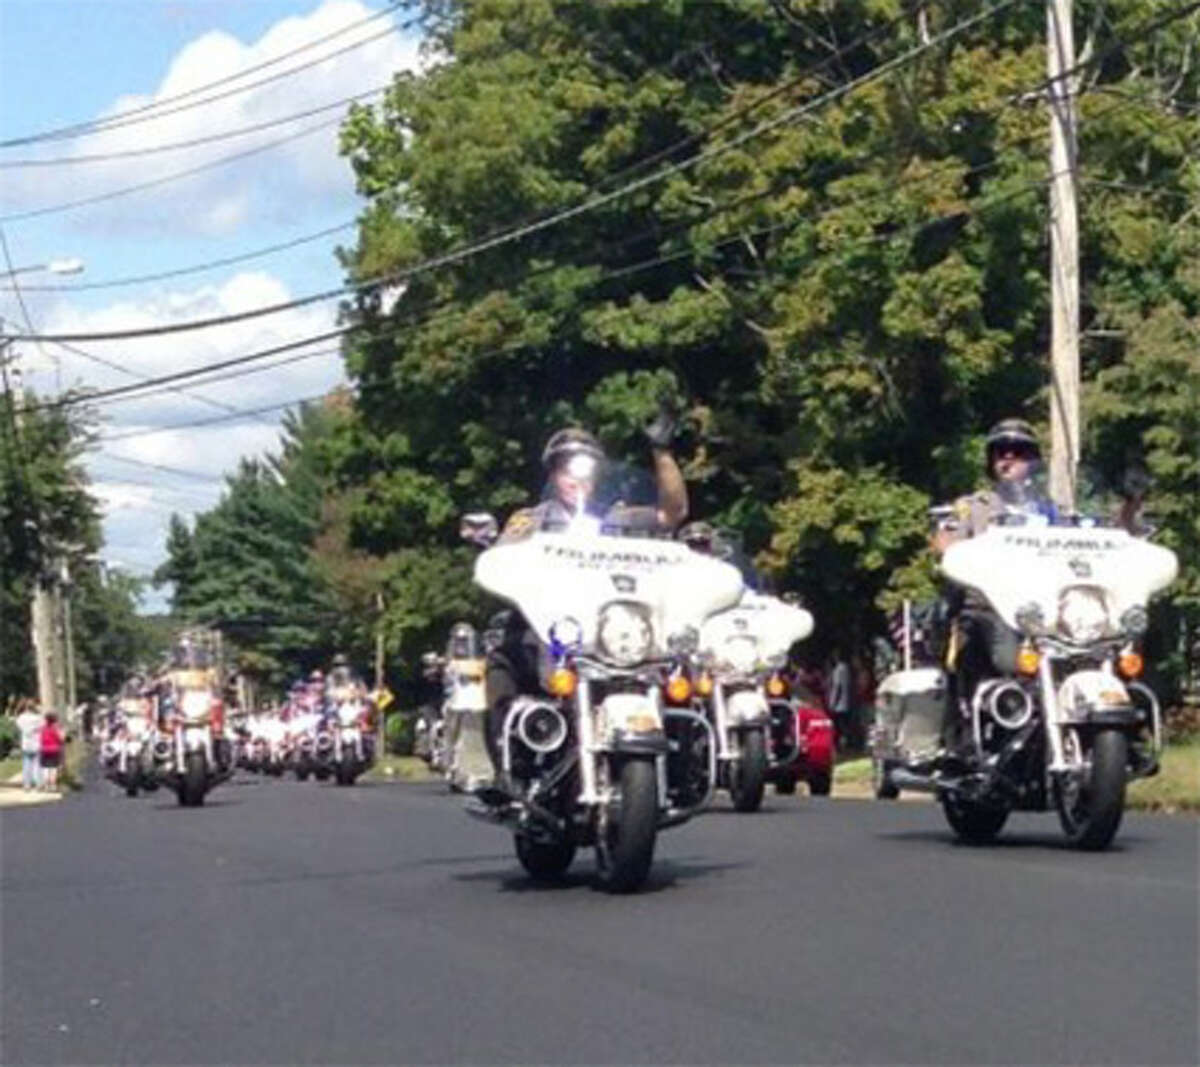 Motorcyclists in the 2013 CT United Ride that passed through 11 towns in Fairfield County.